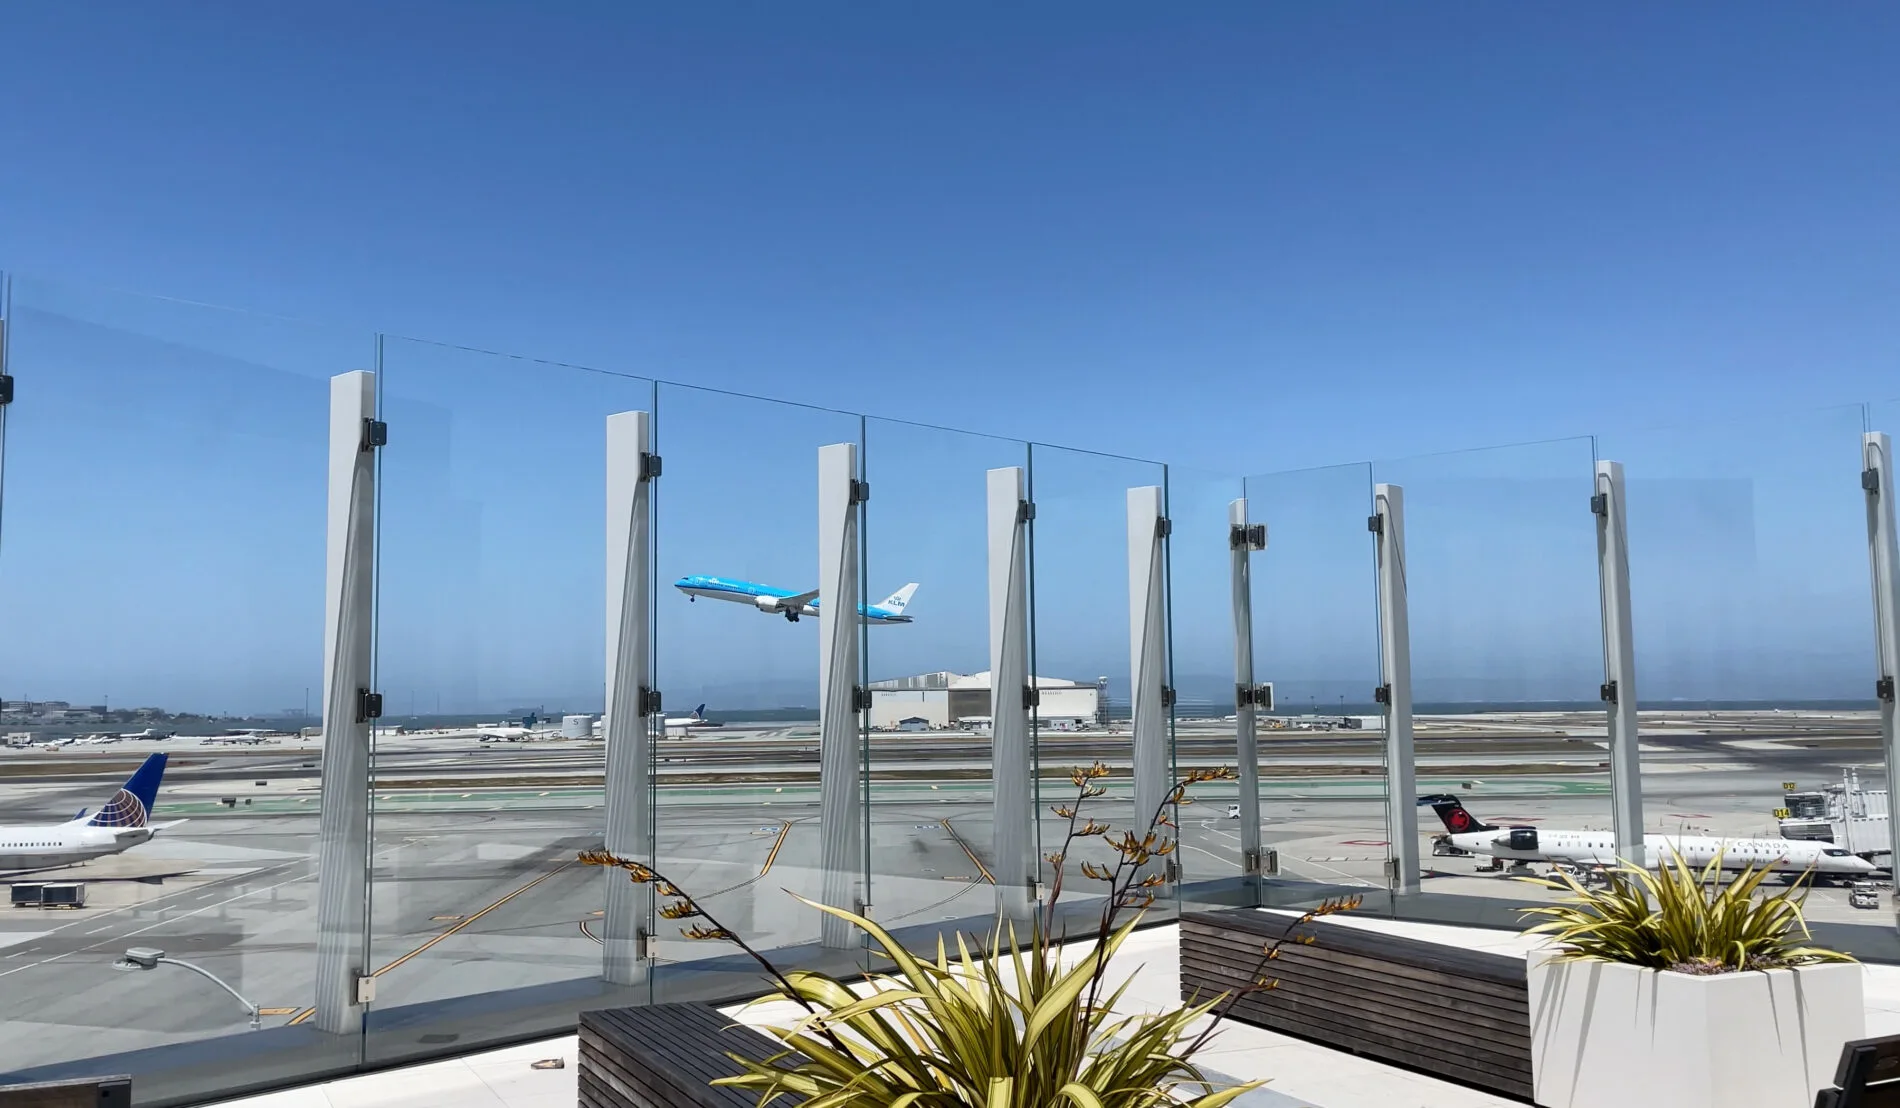 Enjoy the views from Sky Terrace if you have time and are looking for things to do in SFO Airport.